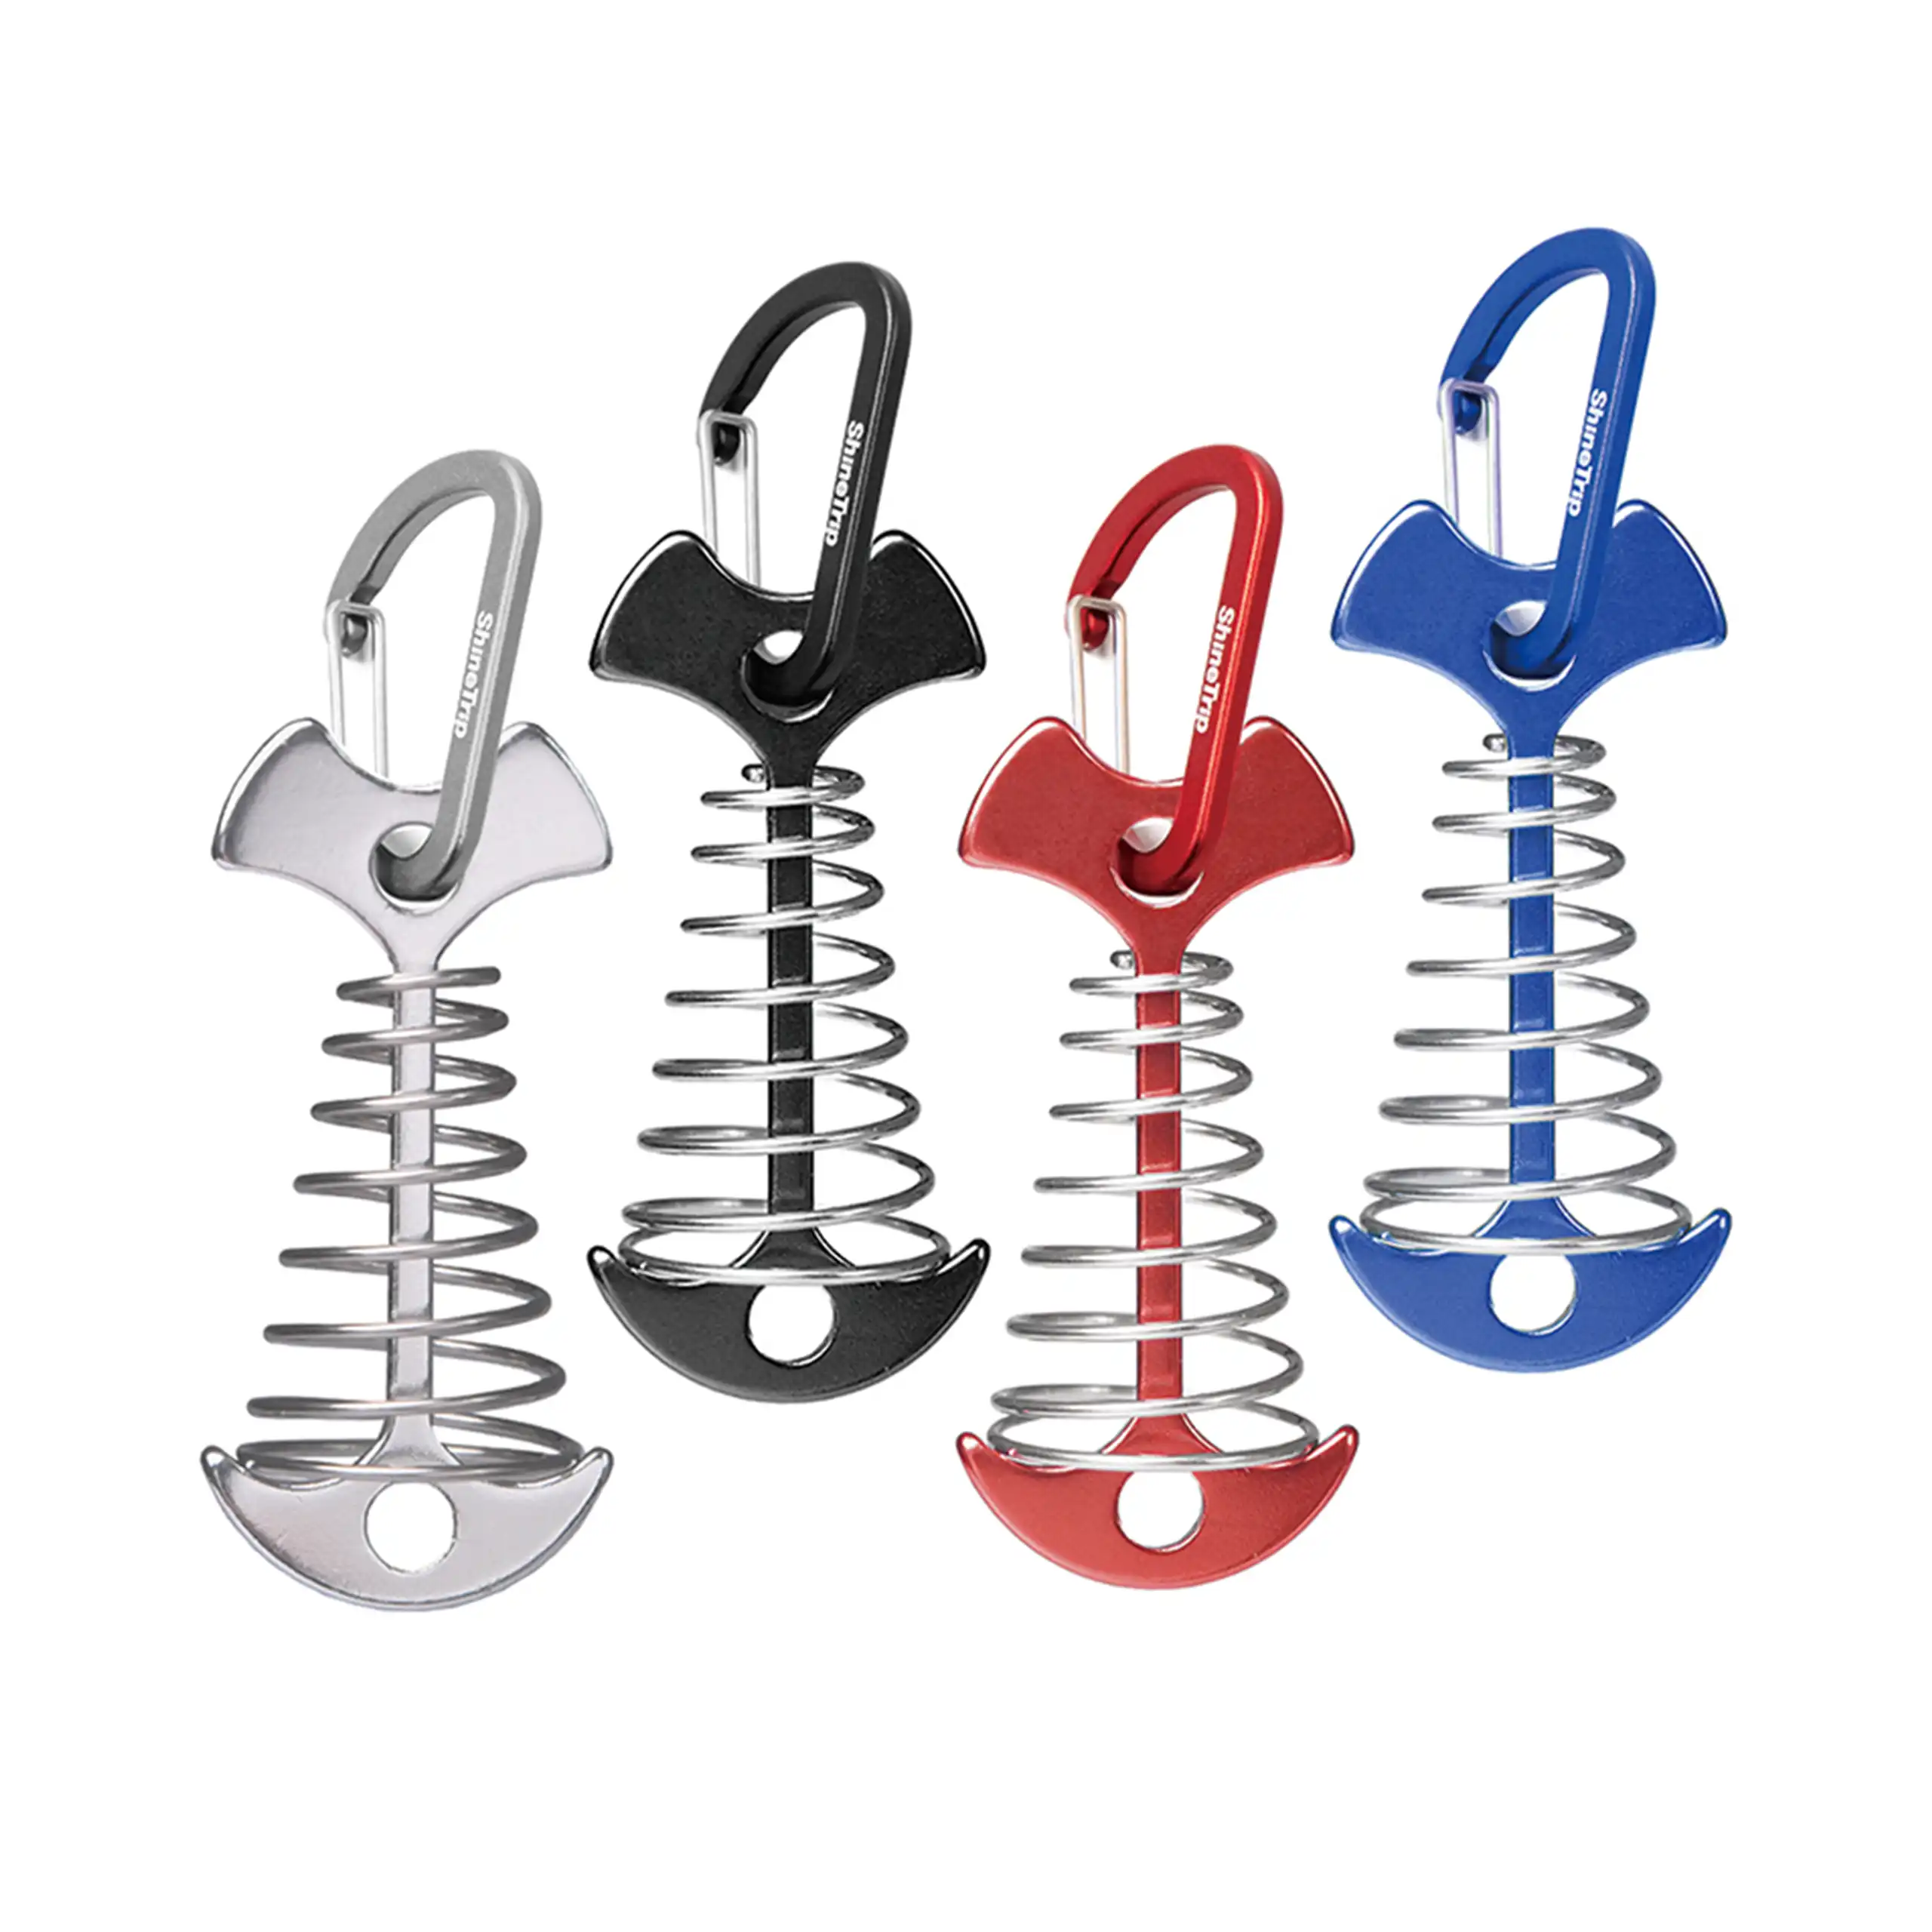 AONIJIE Fishbone Tent Anchor with Carabiner, Extended Version